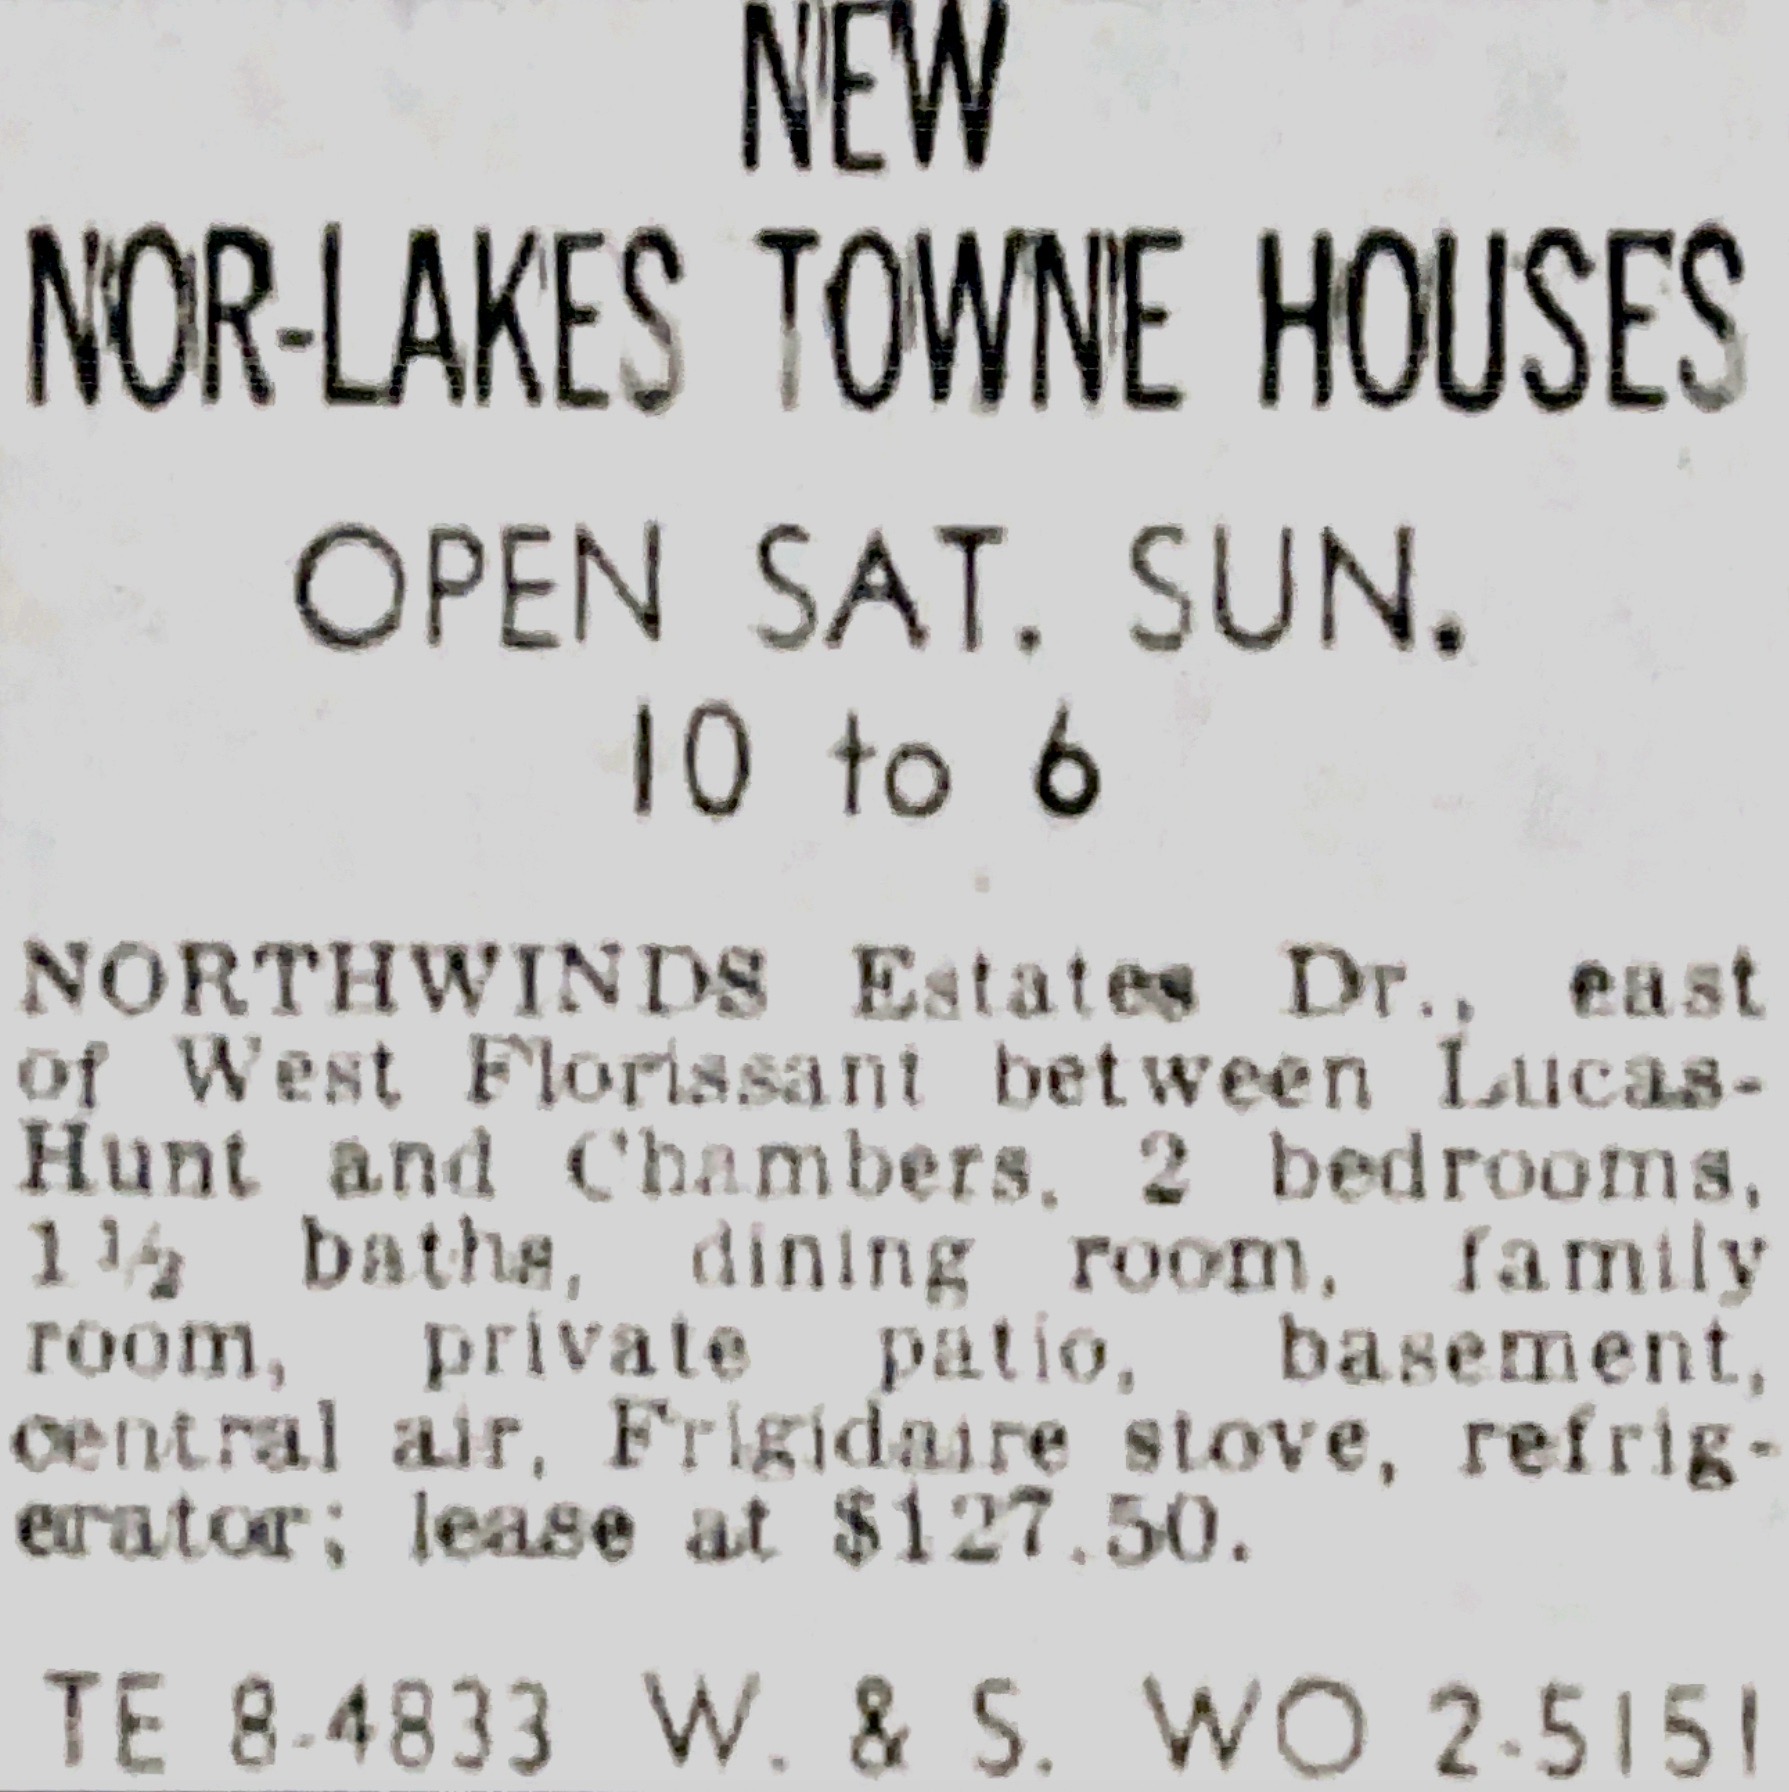 NOR-LAKES TOWNE HOUSES promotional ad. St. Louis Post-Dispatch, February 27, 1965. 